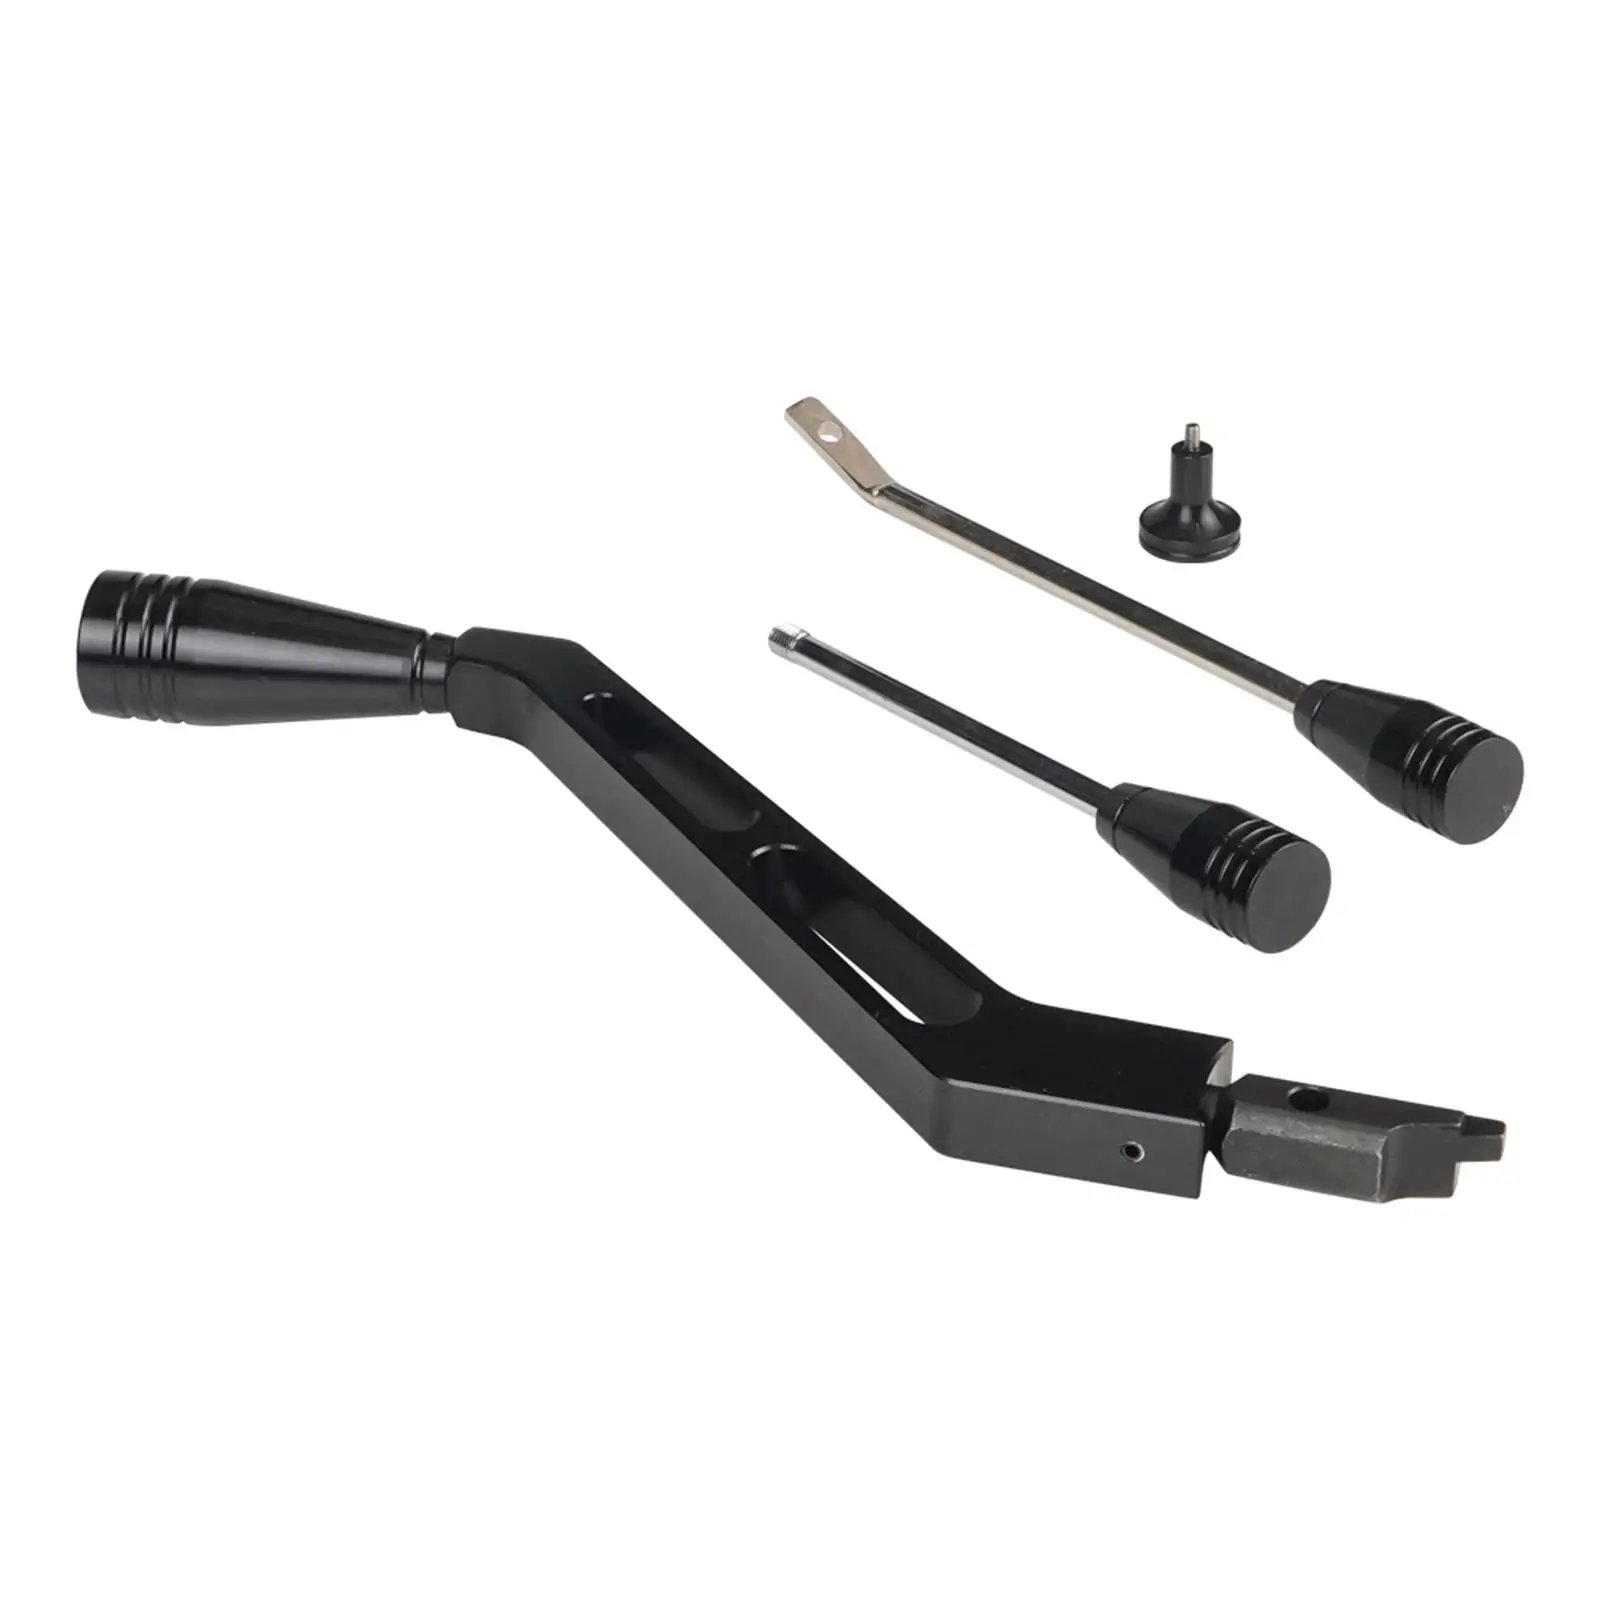 Shifter Turn Signal Lever Hazard Tilt Kit Easy to Install Parts Heavy Duty Car Accessories Replaces for Columns 1967-1994